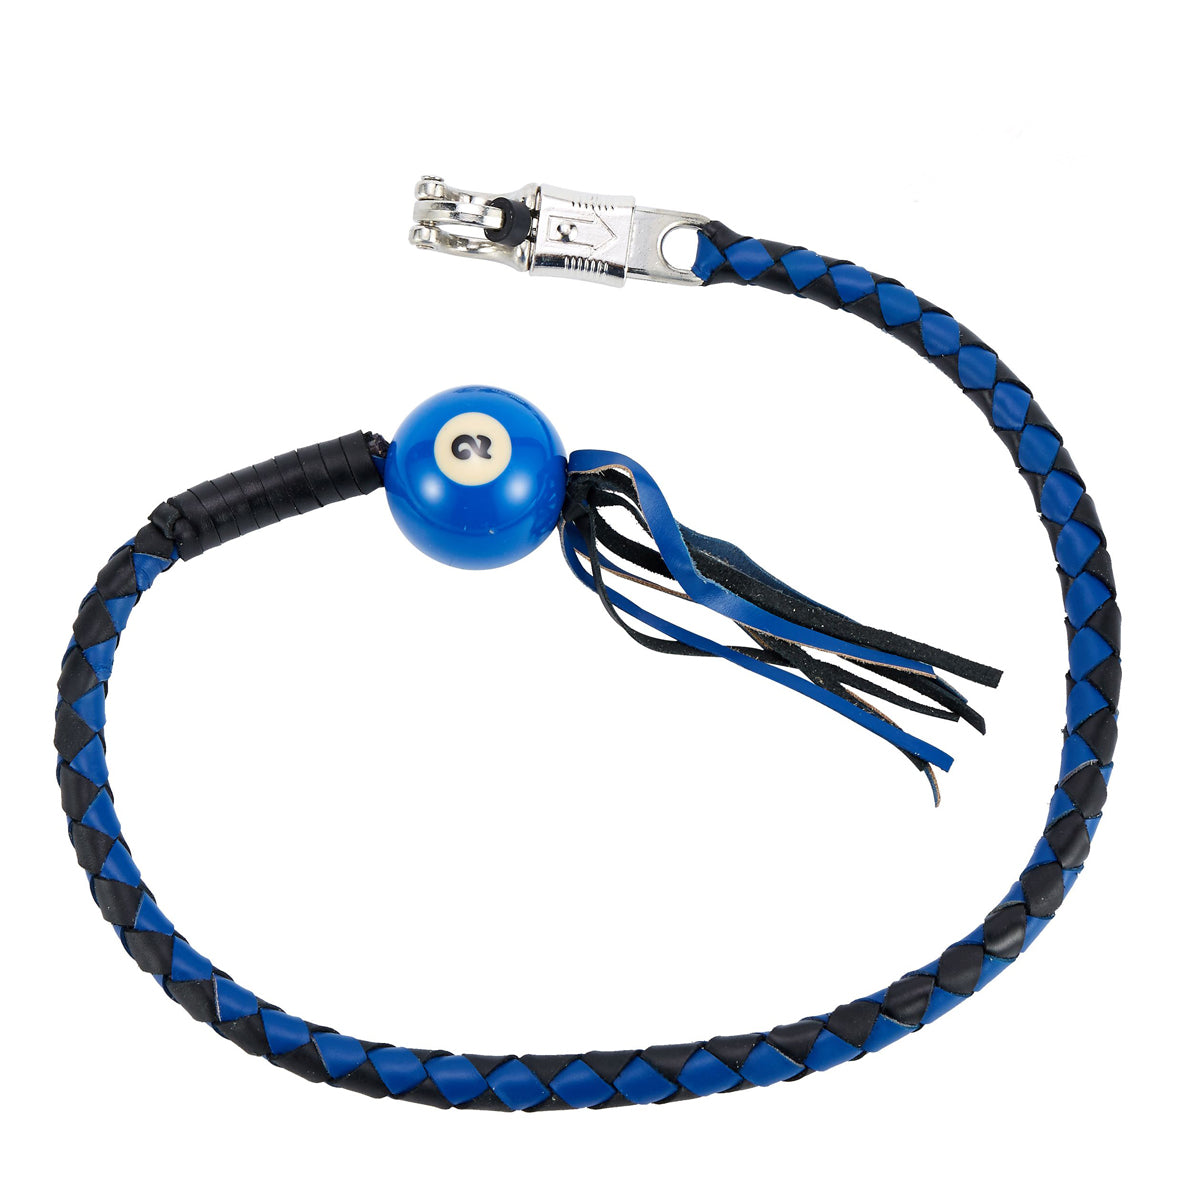 Black And Blue Fringed Get Back Whip W/ Pool Ball